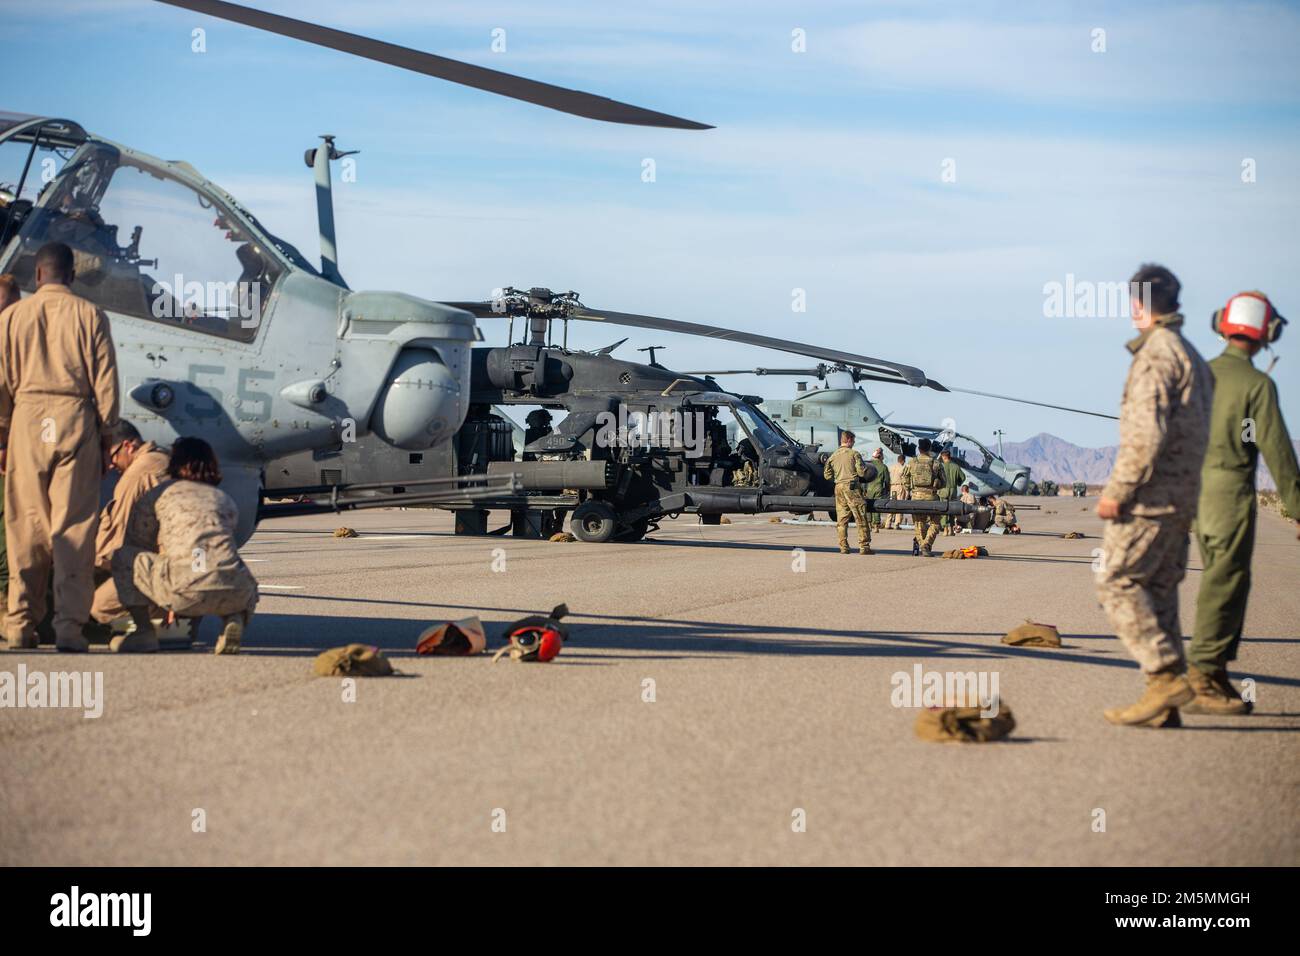 U.S. service members assigned to Marine Aviation Weapons and Tactics Squadron One (MAWTS-1), refuel various aircraft at a forward arming and refueling point (FARP), in support of Weapons and Tactics Instructor (WTI) course 2-22, at Auxiliary Airfield II, near Yuma, Arizona, March 26, 2022. WTI is a seven-week training event hosted by MAWTS-1, providing standardized advanced tactical training and certification of unit instructor qualifications to support Marine aviation training and readiness, and assists in developing and employing aviation weapons and tactics. Stock Photo